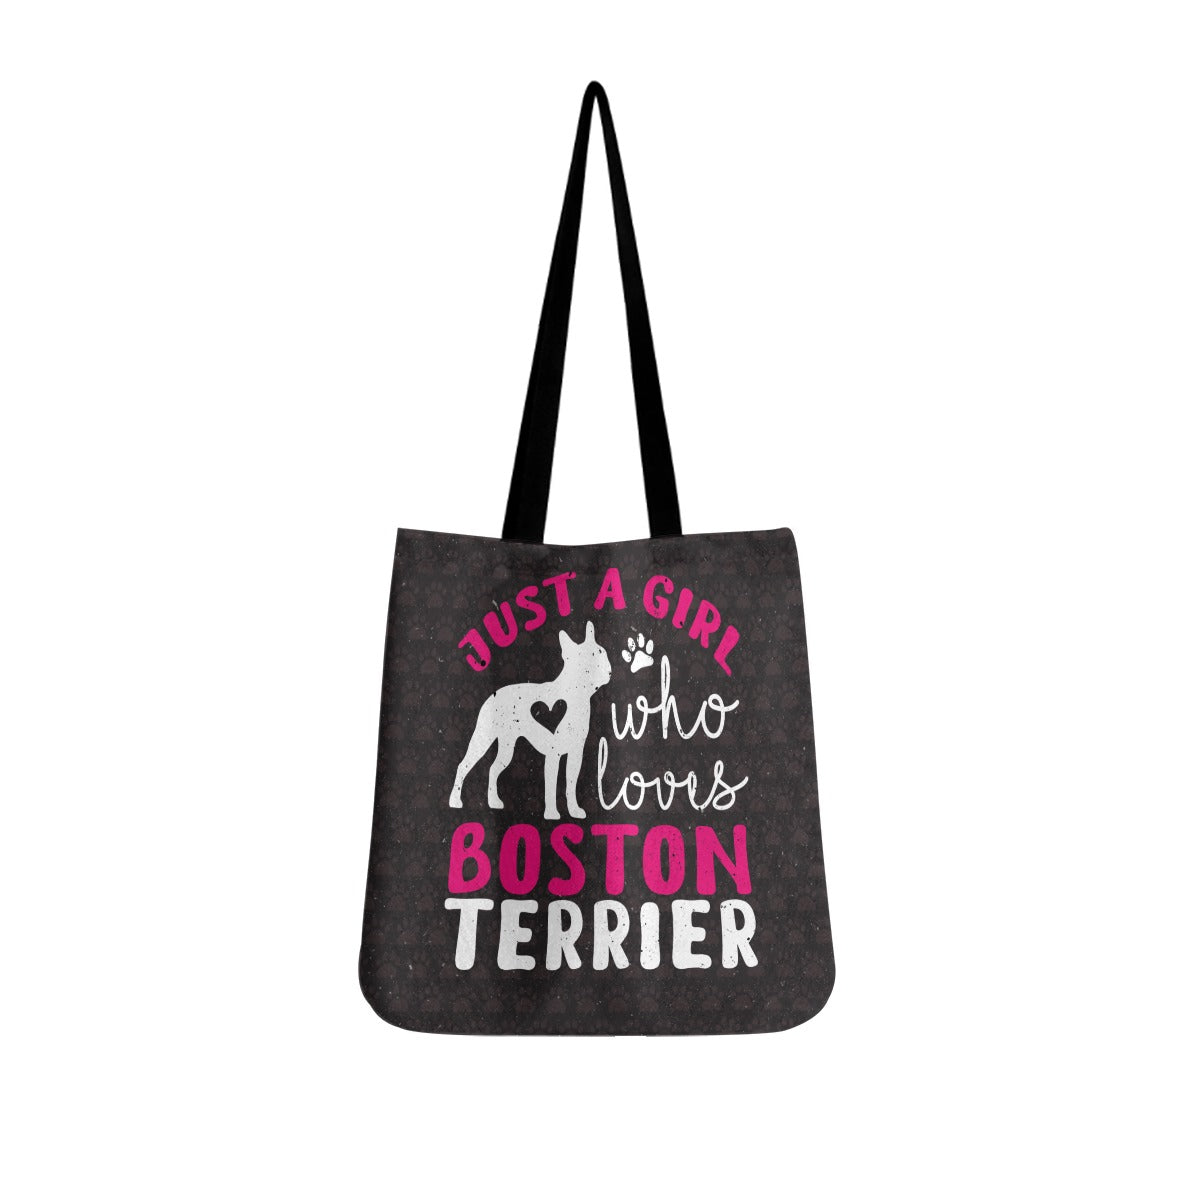 Skippy- Cloth Tote Bags for Boston Terrier lovers